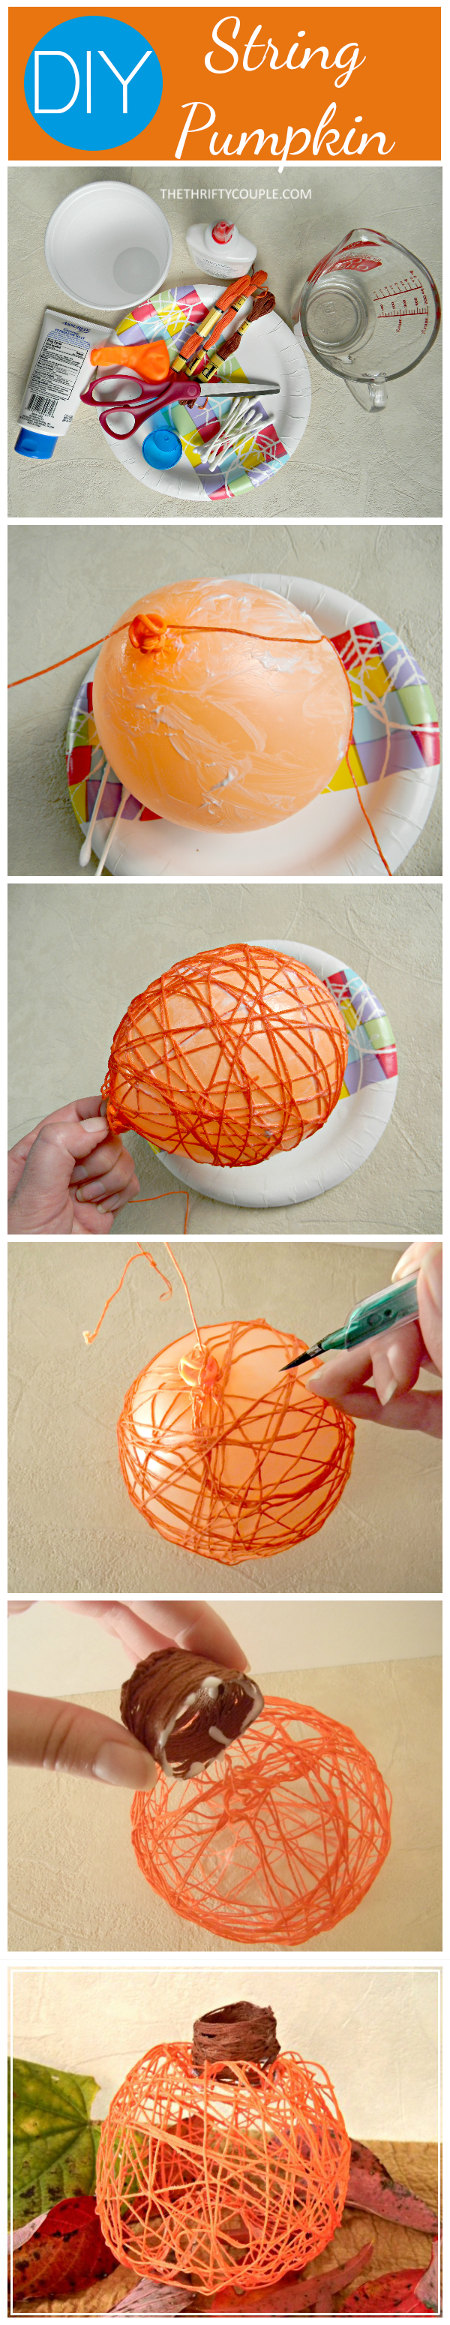 how-to-make-pumpkin-decor-with-string